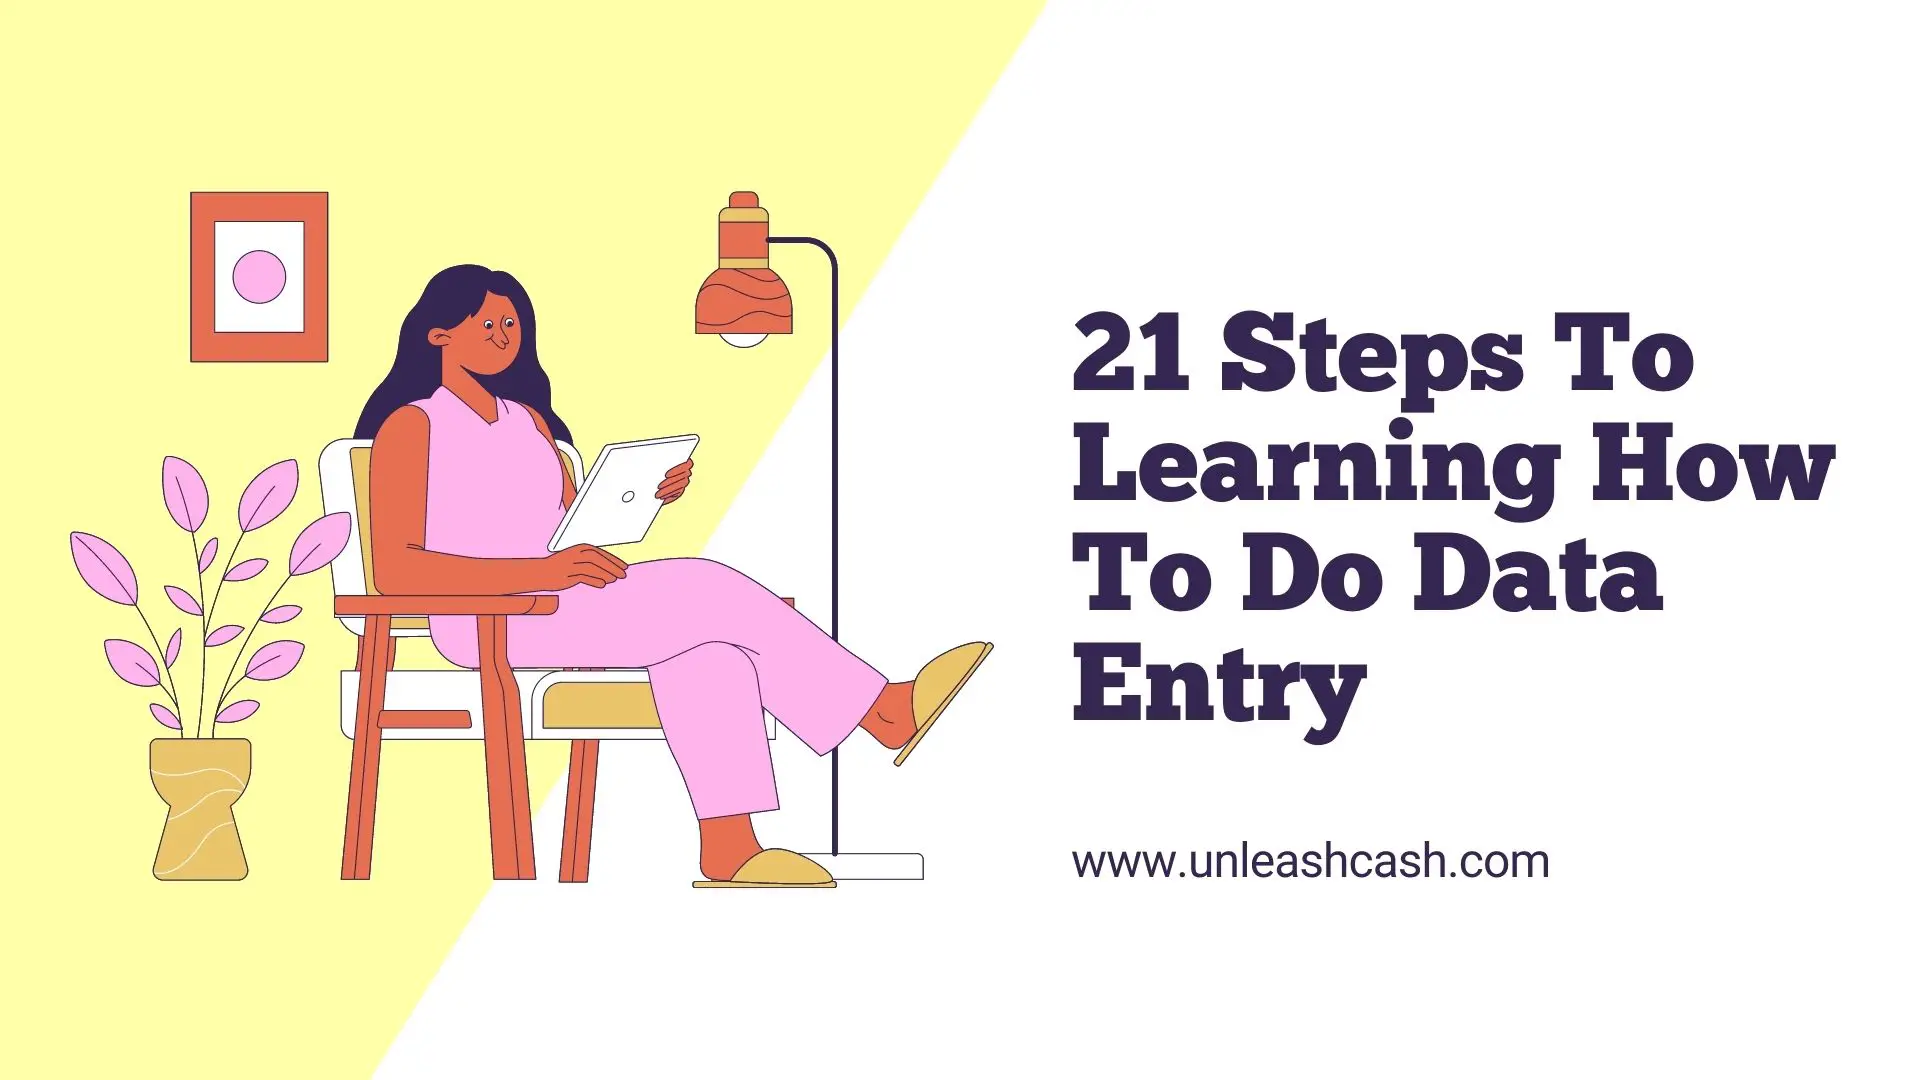 21 Steps To Learning How To Do Data Entry